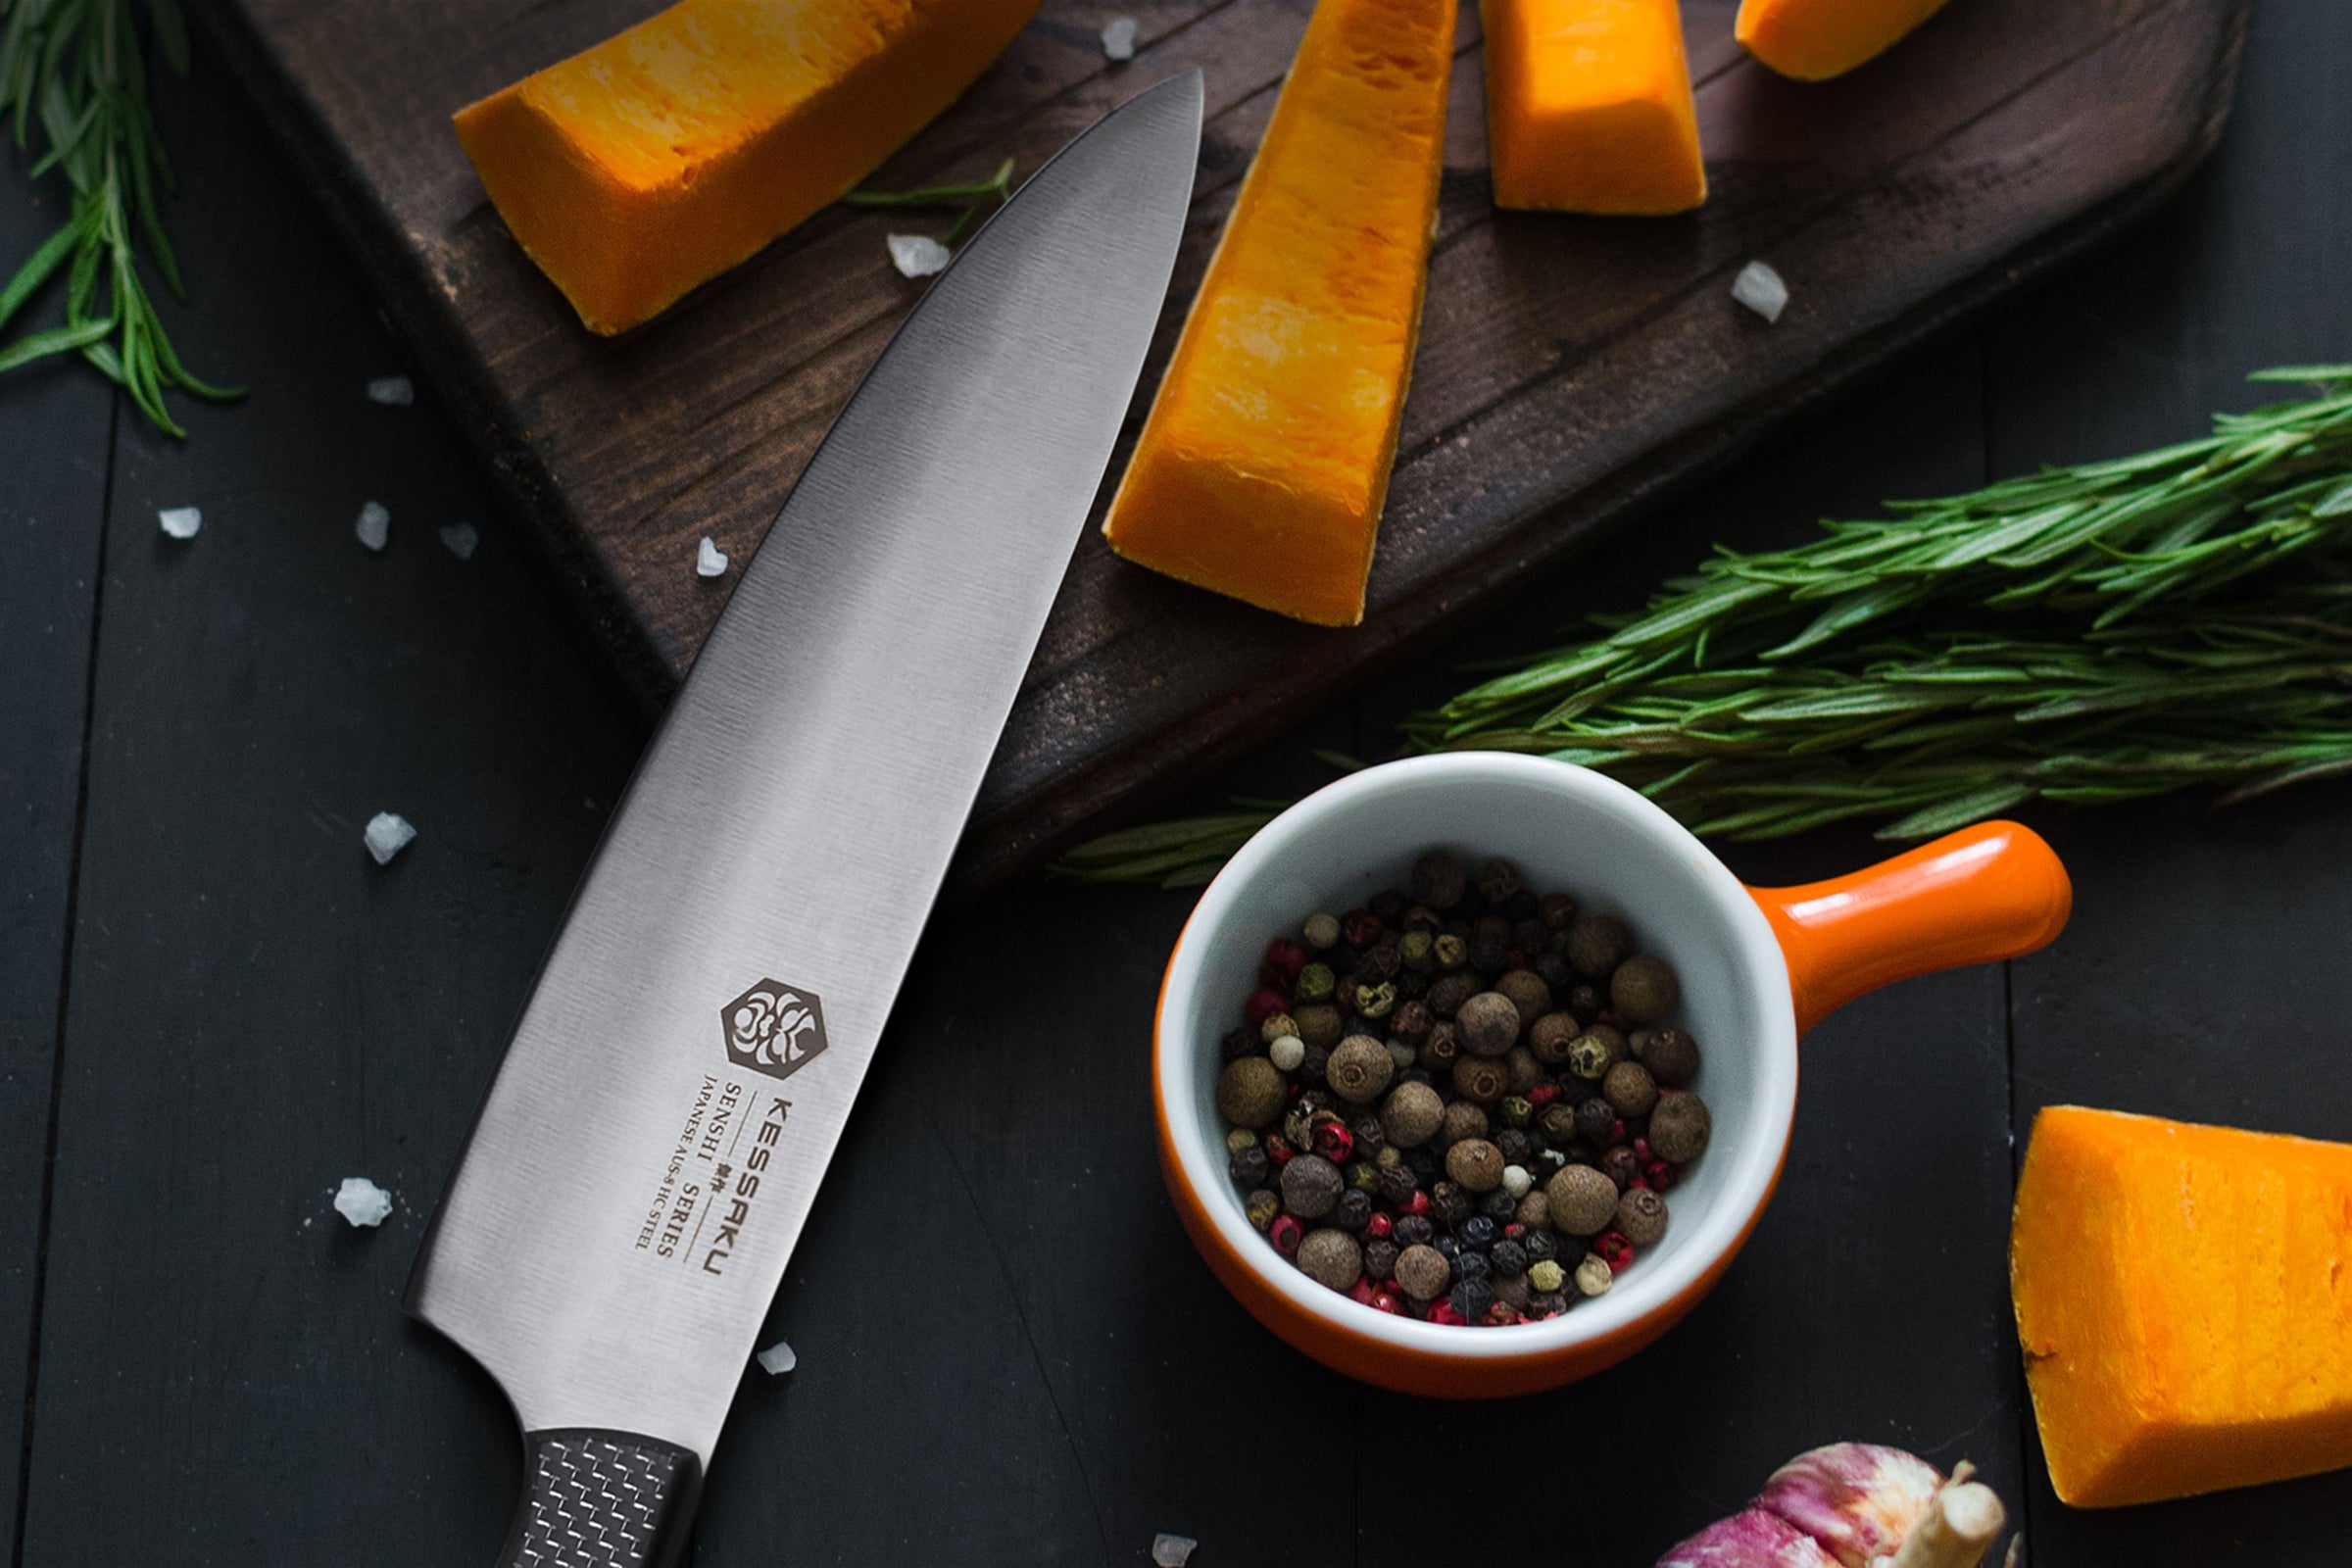 The Senshi Chef's Knife used to slice large cuts of pumpkin.